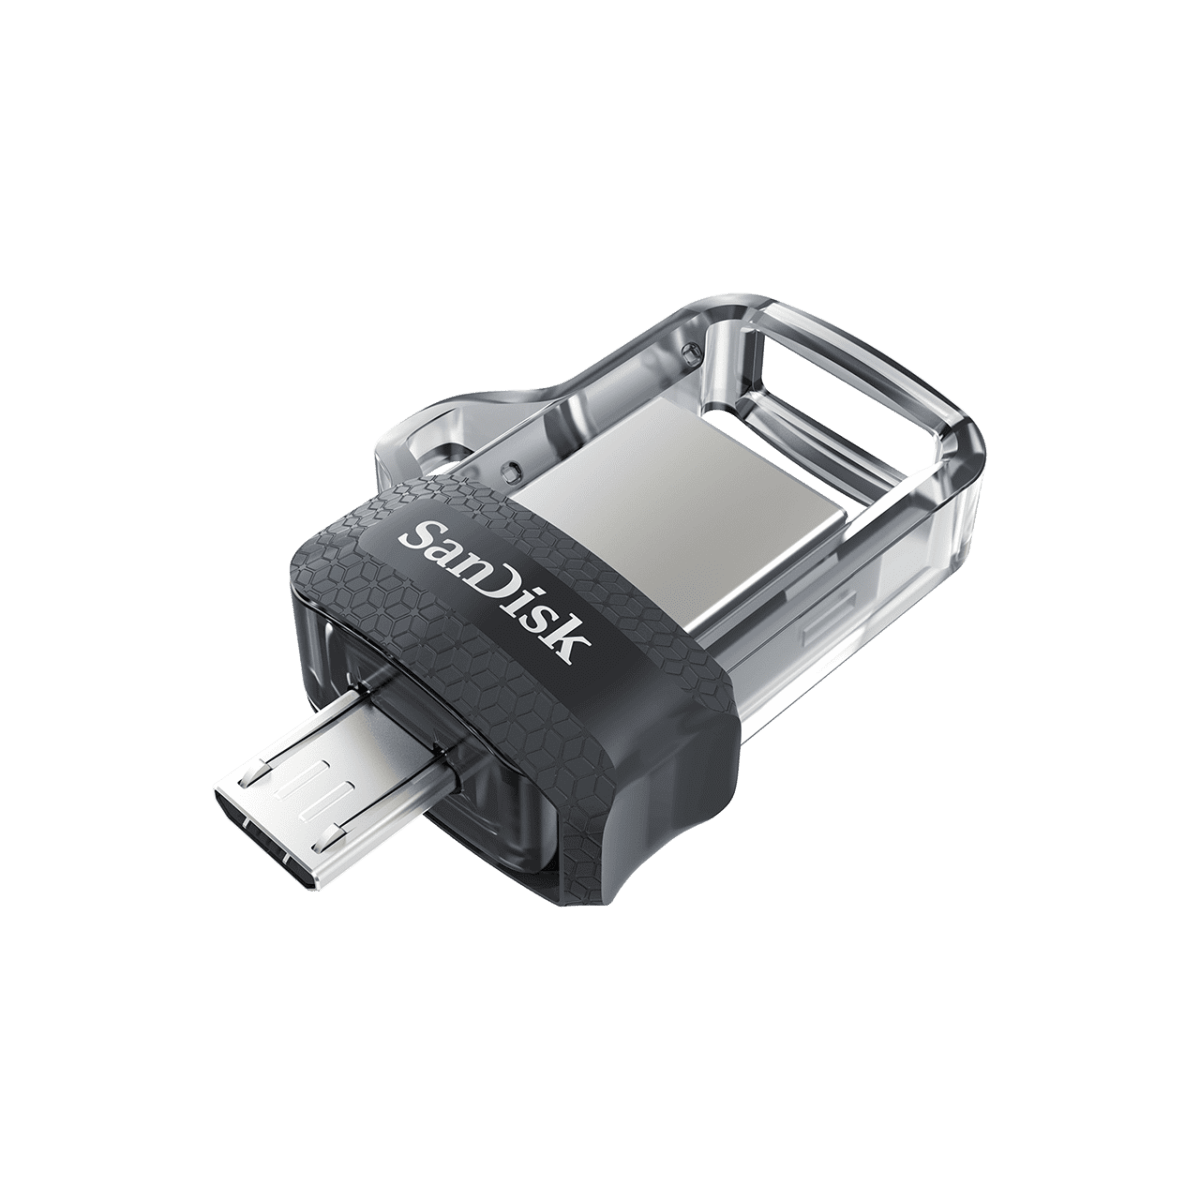 Ultra Dual Drive Usb M 3 Open Angled2.Png.thumb .1280.1280 Sandisk &Amp;Lt;Div Class=&Amp;Quot;Active&Amp;Quot; Data-Sku=&Amp;Quot;Sddd3-016G-A46&Amp;Quot;&Amp;Gt; &Amp;Lt;H1&Amp;Gt;Instantly Free Up Space On Your Android Smartphone&Amp;Lt;/H1&Amp;Gt; &Amp;Lt;Div Class=&Amp;Quot;Inheritpara Mb-4&Amp;Quot;&Amp;Gt; The Sandisk Ultra® Dual Drive M3.0 Makes It Easy To Transfer Content From Your Phone To Your Computer. With A Micro-Usb Connector On One End And A Usb 3.0 Connector On The Other, The Drive Lets You Move Content Easily Between Your Devices—From Your Android™ Smartphone Or Tablet To Your Laptop, Pc Or Mac Computer&Amp;Lt;A Class=&Amp;Quot;Disclosure&Amp;Quot; Tabindex=&Amp;Quot;0&Amp;Quot; Href=&Amp;Quot;Https://Shop.westerndigital.com/Products/Usb-Flash-Drives/Sandisk-Ultra-Dual-Drive-M30-Usb-3-0-Micro-Usb#Disclosures&Amp;Quot; Target=&Amp;Quot;_Self&Amp;Quot; Rel=&Amp;Quot;Noopener Noreferrer&Amp;Quot; Aria-Labelledby=&Amp;Quot;Disclosures&Amp;Quot;&Amp;Gt;&Amp;Lt;Sup&Amp;Gt;1&Amp;Lt;/Sup&Amp;Gt;&Amp;Lt;/A&Amp;Gt;. The Usb 3.0 Connector Is High-Performance And Backward-Compatible With Usb 2.0 Ports. The Sandisk® Memory Zone App&Amp;Lt;A Class=&Amp;Quot;Disclosure&Amp;Quot; Tabindex=&Amp;Quot;0&Amp;Quot; Href=&Amp;Quot;Https://Shop.westerndigital.com/Products/Usb-Flash-Drives/Sandisk-Ultra-Dual-Drive-M30-Usb-3-0-Micro-Usb#Disclosures&Amp;Quot; Target=&Amp;Quot;_Self&Amp;Quot; Rel=&Amp;Quot;Noopener Noreferrer&Amp;Quot; Aria-Labelledby=&Amp;Quot;Disclosures&Amp;Quot;&Amp;Gt;&Amp;Lt;Sup&Amp;Gt;2&Amp;Lt;/Sup&Amp;Gt;&Amp;Lt;/A&Amp;Gt; For Android (Available On Google Play) Helps You Manage Your Device’s Memory And Your Content. &Amp;Lt;Strong&Amp;Gt;Warranty&Amp;Lt;/Strong&Amp;Gt; The Sandisk Ultra Flair Usb 3.0 Flash Drive Is Backed By A Five-Year Manufacturer Warranty&Amp;Lt;A Class=&Amp;Quot;Disclosure&Amp;Quot; Tabindex=&Amp;Quot;0&Amp;Quot; Href=&Amp;Quot;Https://Shop.westerndigital.com/Products/Usb-Flash-Drives/Sandisk-Ultra-Flair-Usb-3-0#Disclosures&Amp;Quot; Target=&Amp;Quot;_Self&Amp;Quot; Rel=&Amp;Quot;Noopener Noreferrer&Amp;Quot; Aria-Labelledby=&Amp;Quot;Disclosures&Amp;Quot;&Amp;Gt;&Amp;Lt;Sup&Amp;Gt;2&Amp;Lt;/Sup&Amp;Gt;&Amp;Lt;/A&Amp;Gt; &Amp;Lt;/Div&Amp;Gt; &Amp;Lt;/Div&Amp;Gt; Sandisk Ultra Dual Drive M3.0 Flash Drive For Android Smartphones (128Gb)